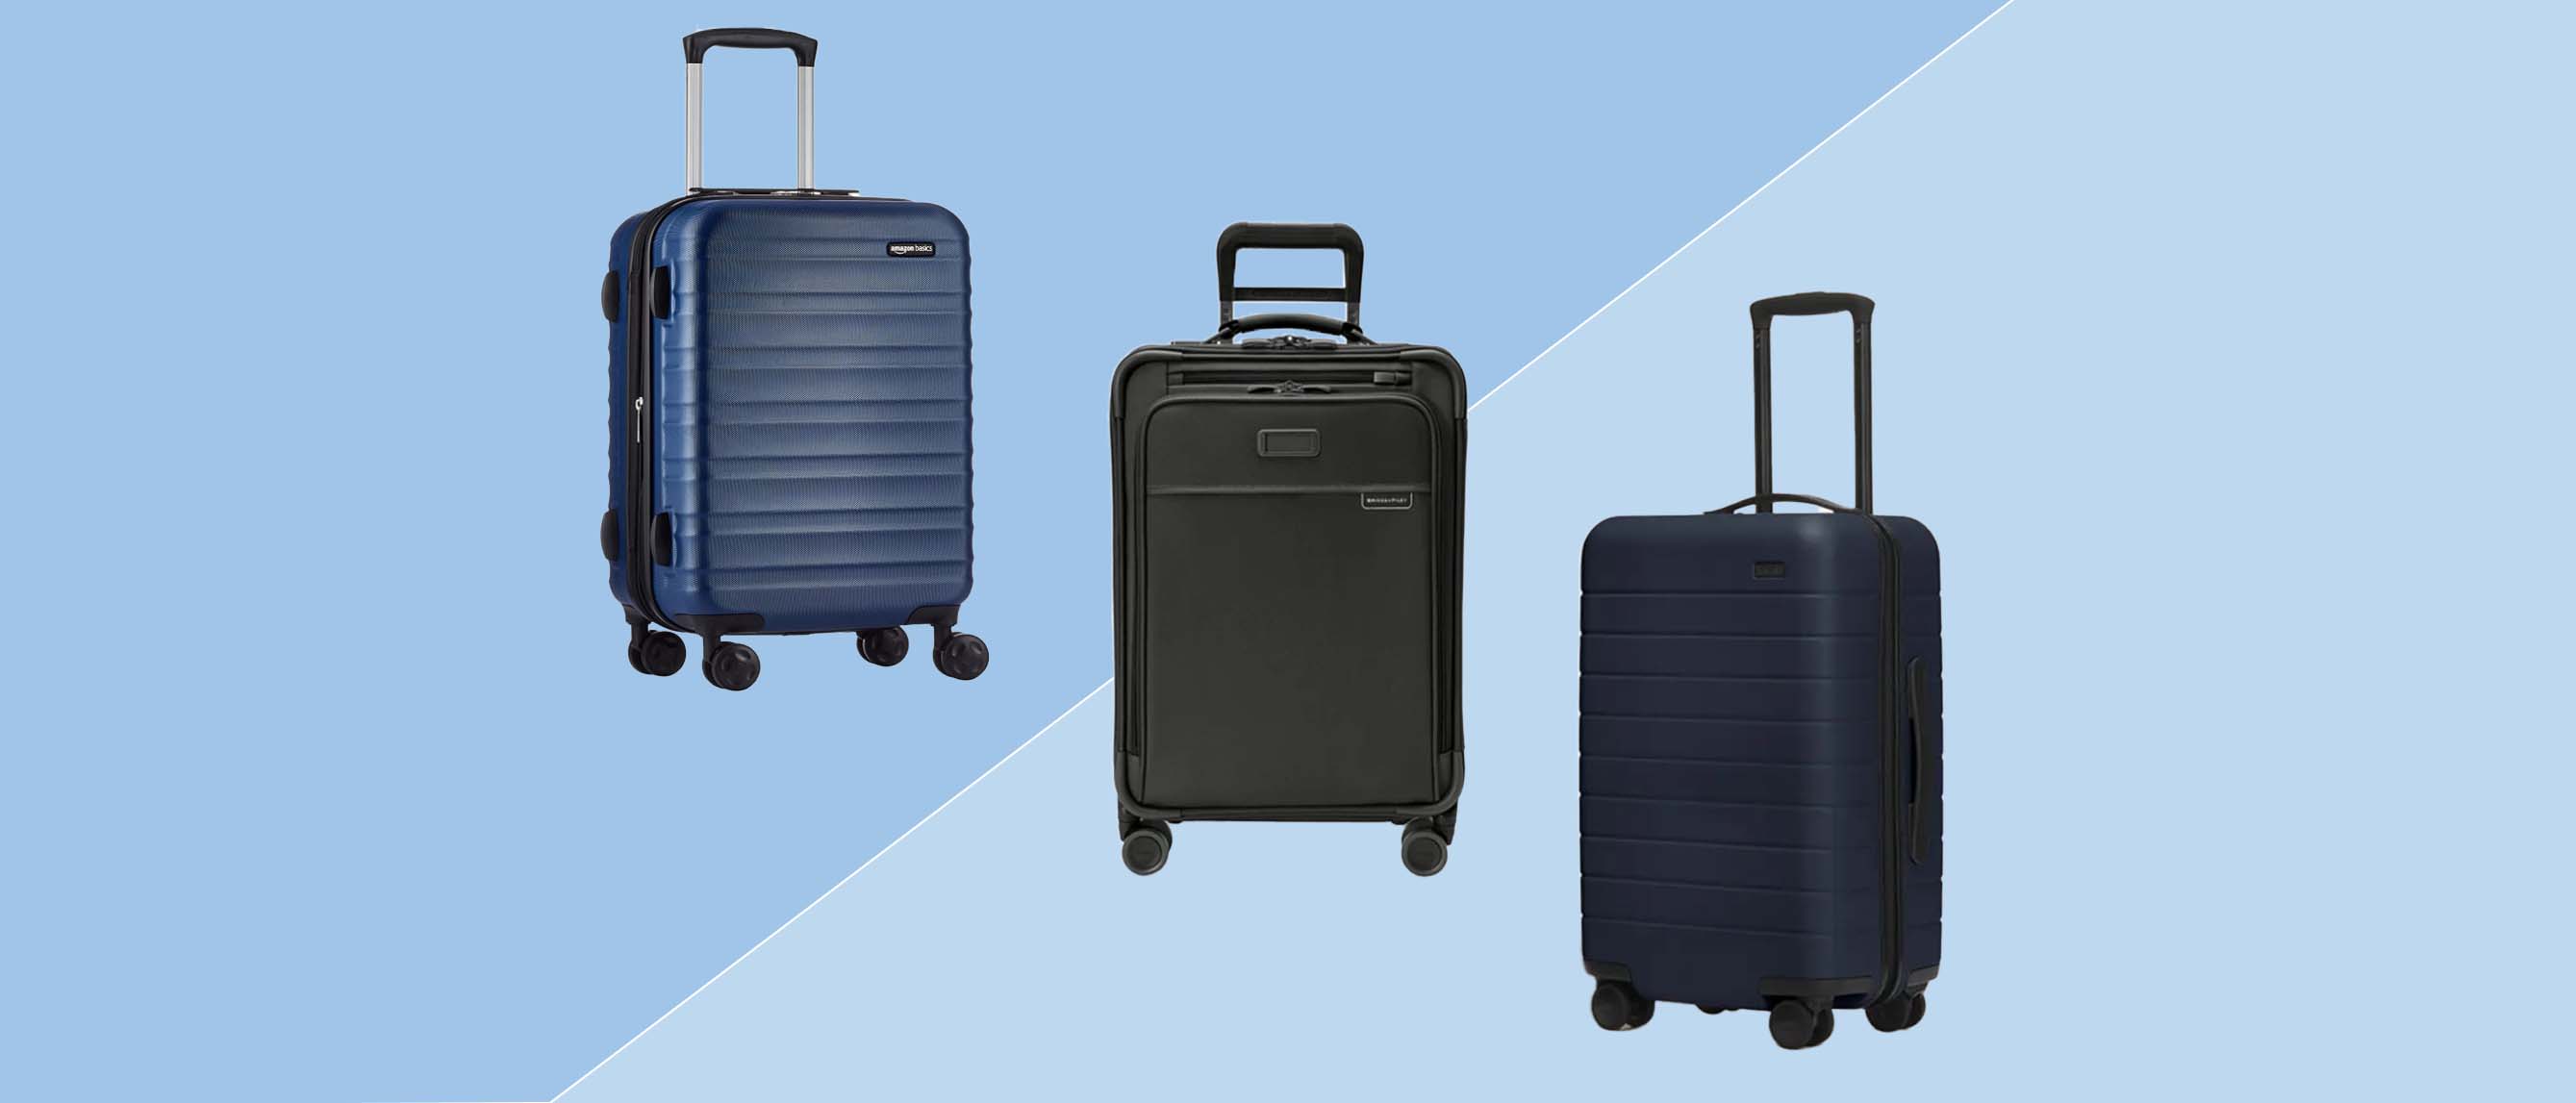 two blue suitcases and a black suitcase on a blue background